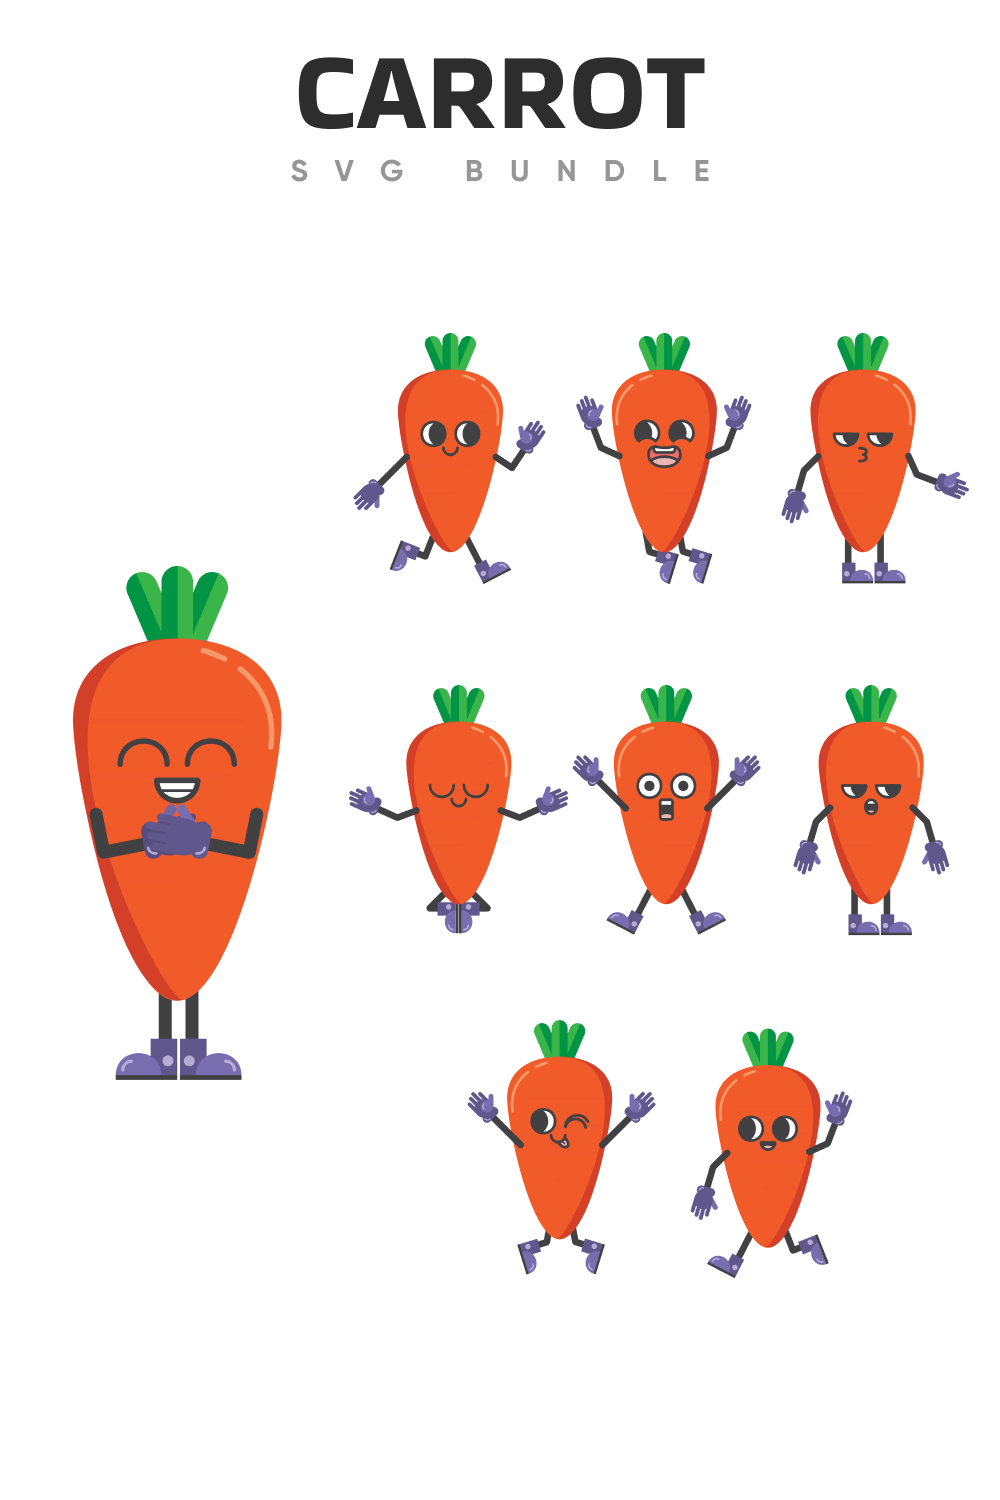 Diverse of the carrot mood.